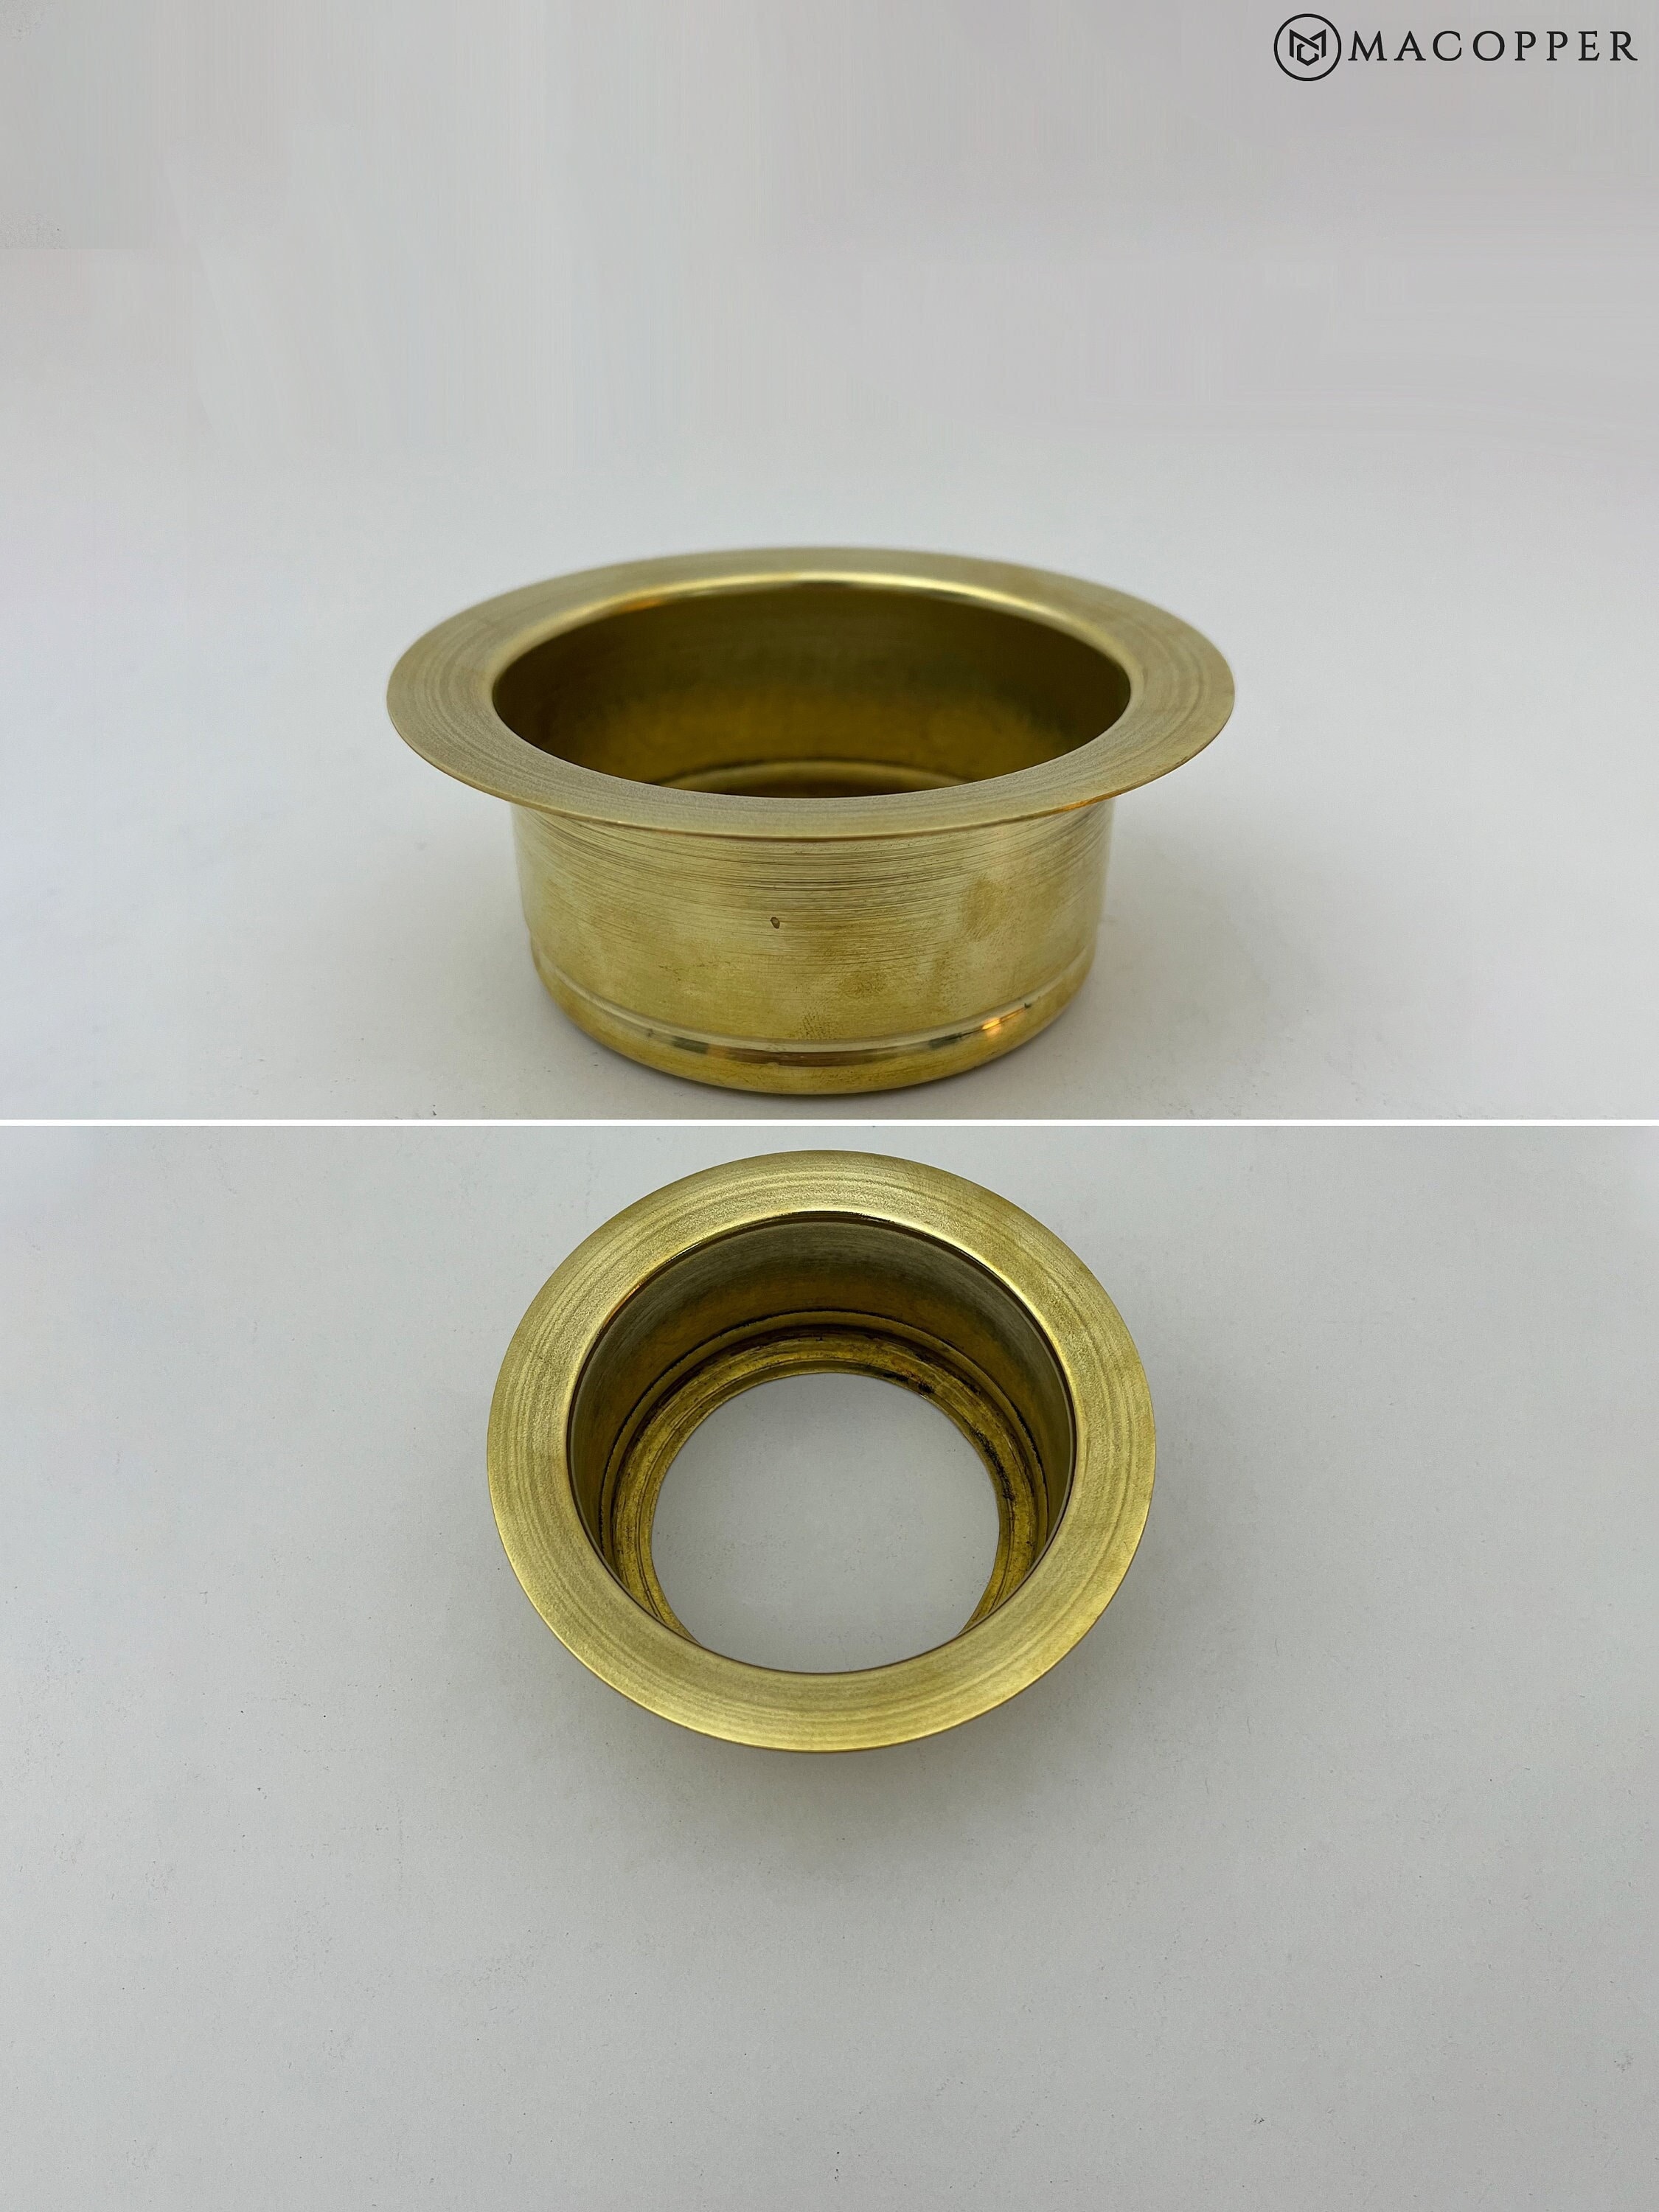 Extended Garbage Disposal Flange with Deep Basket Strainer for